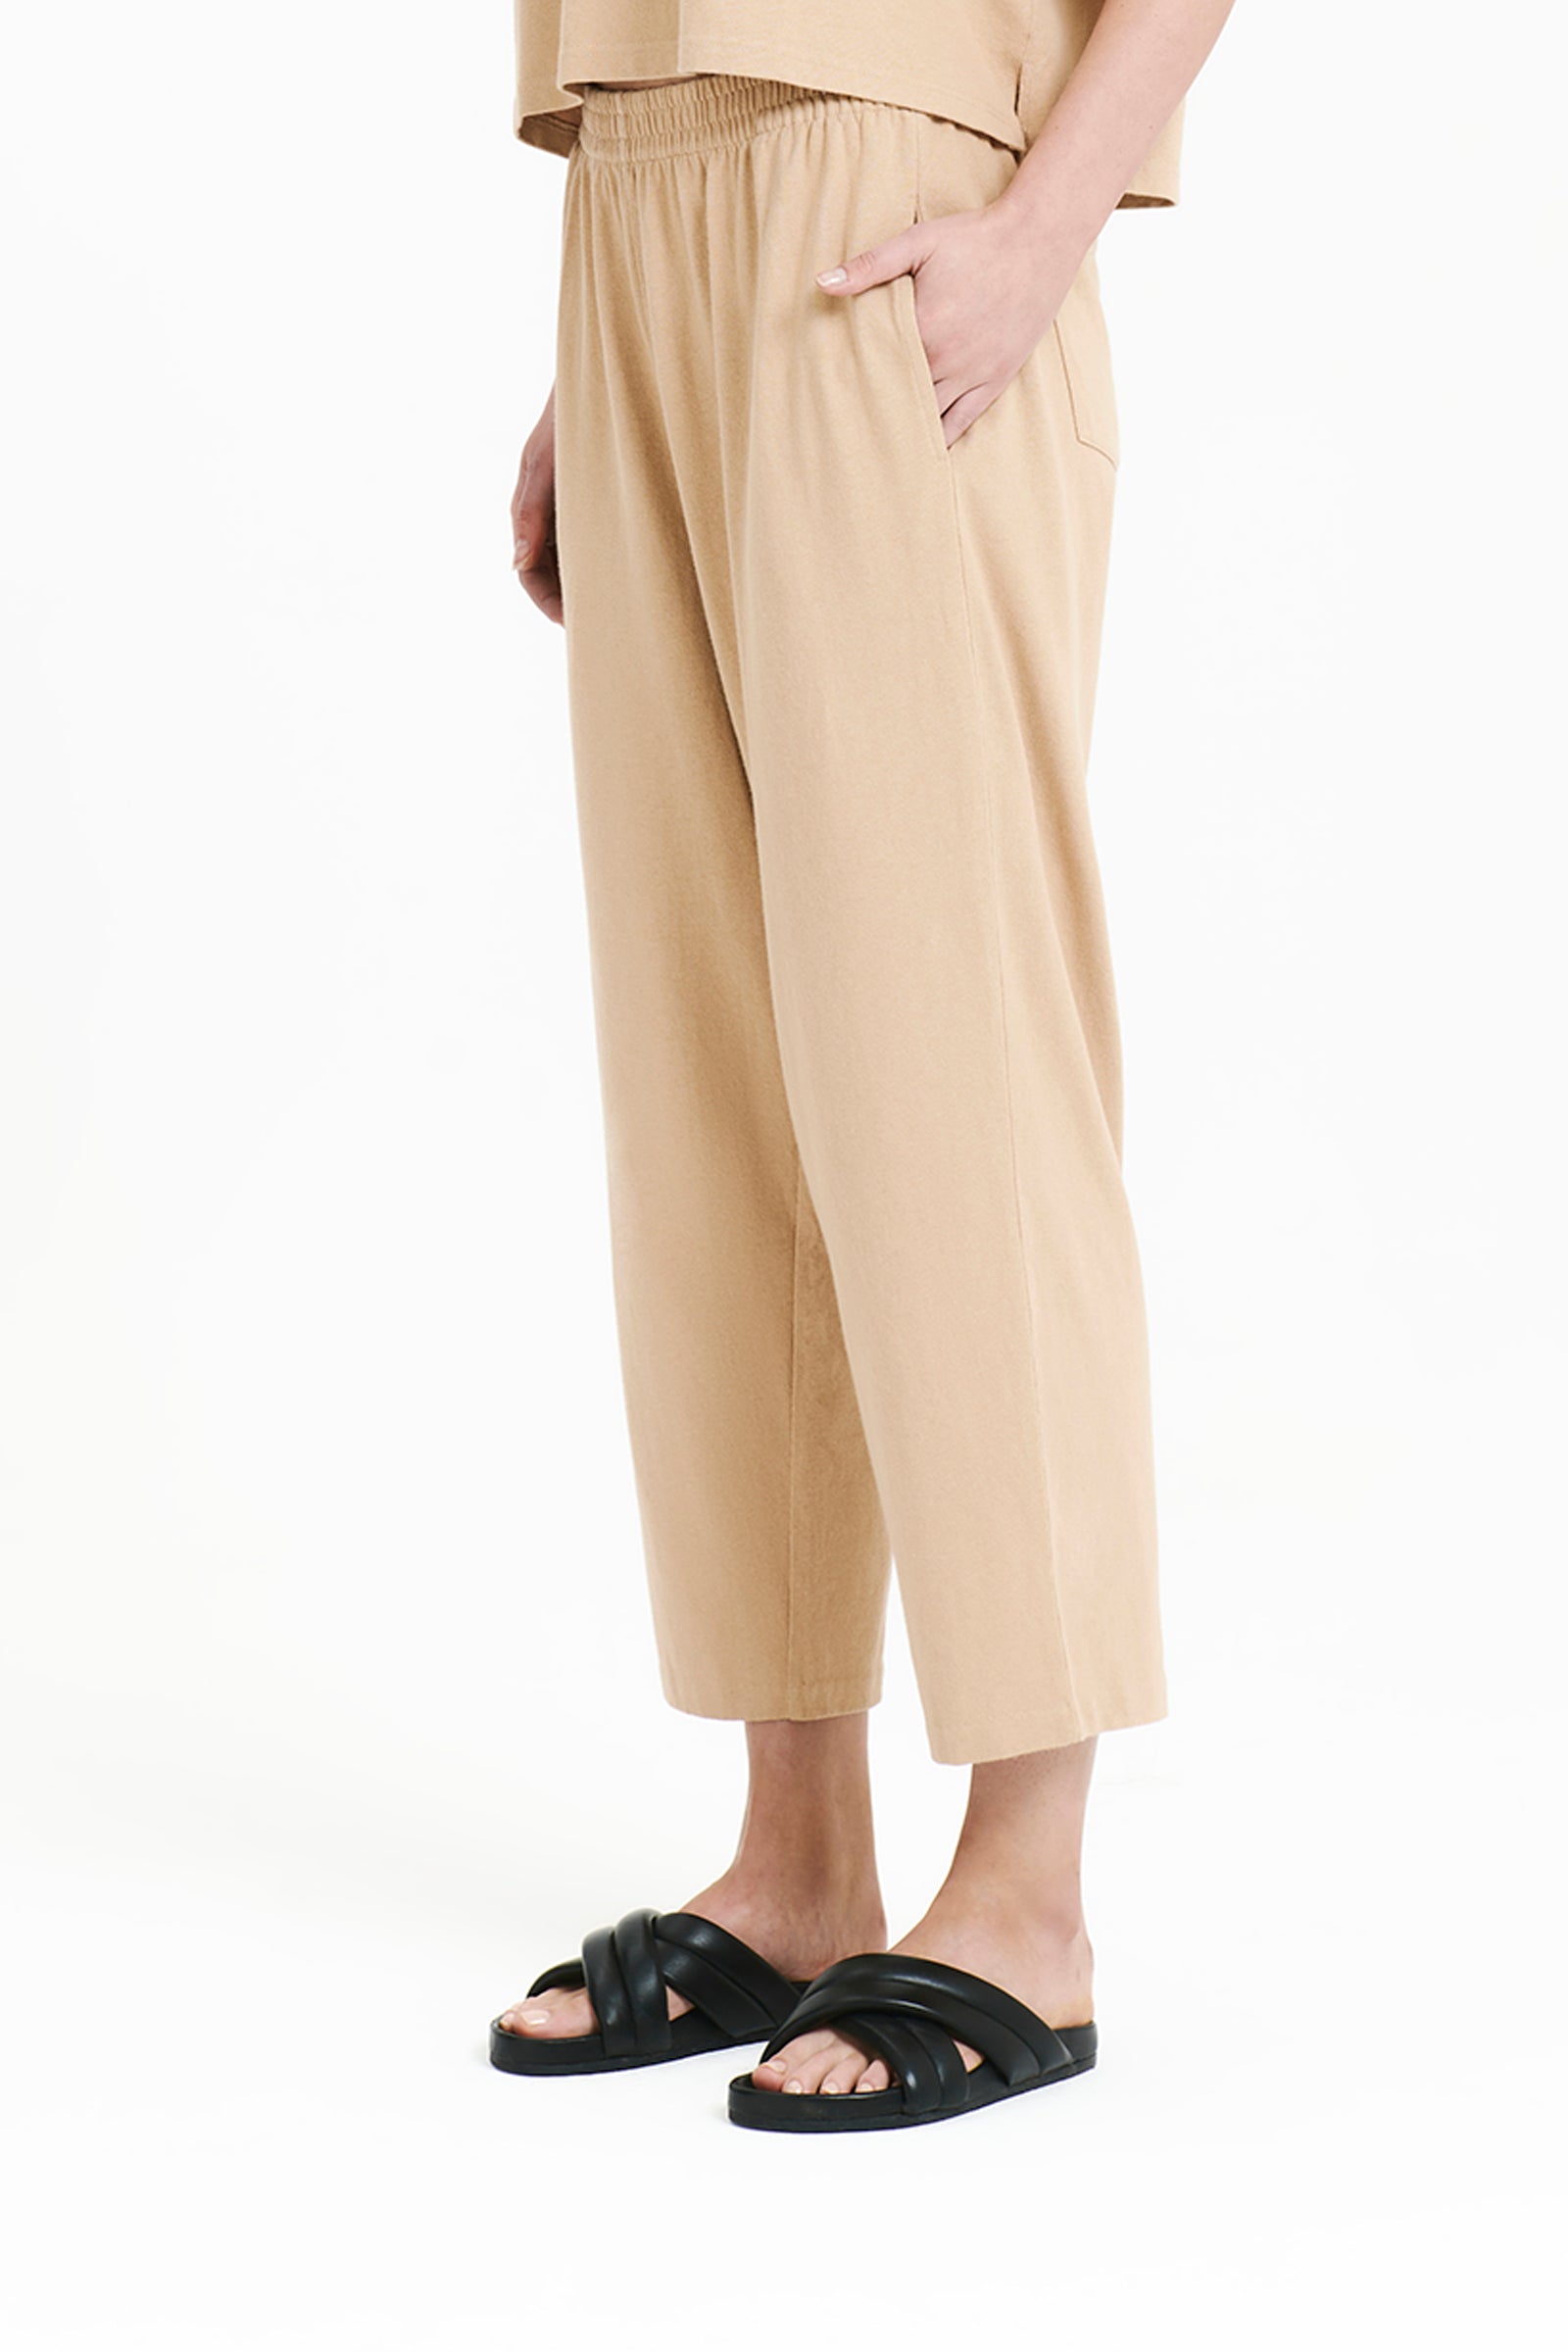 Nude Lucy Fresno Pant In A Light Yellow Toned Dune Colour